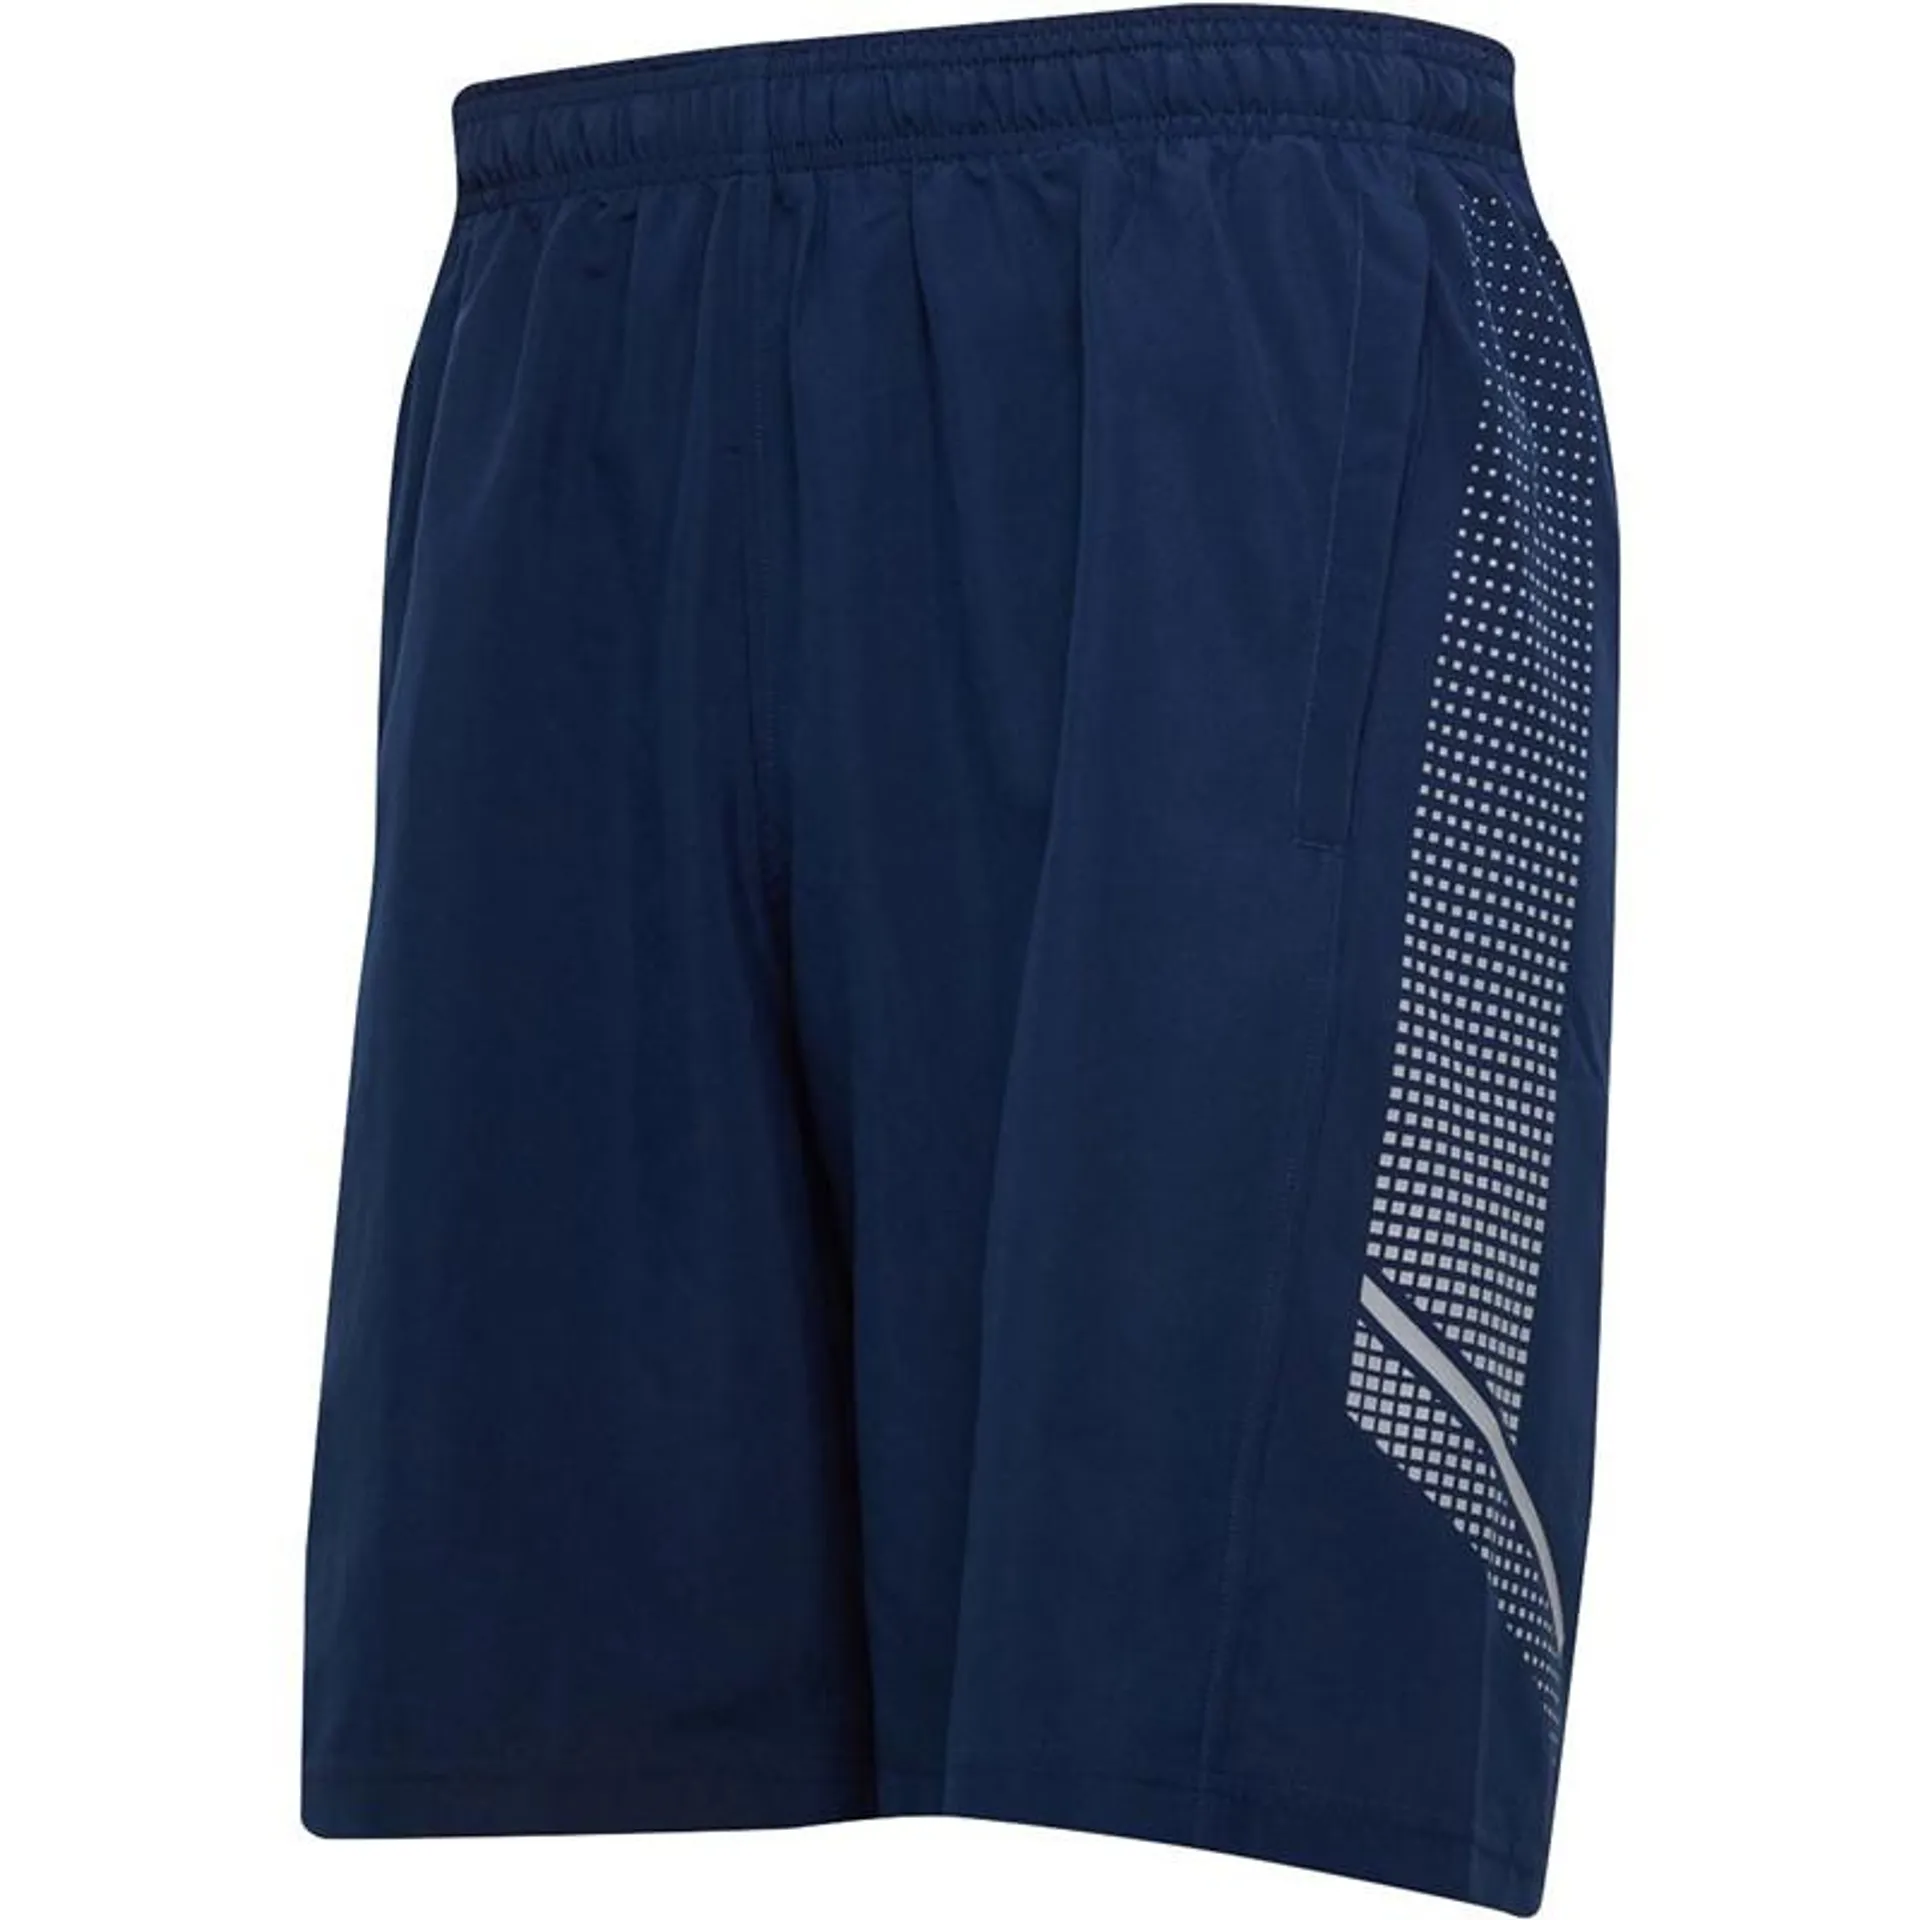 Under Armour Mens UA Woven Graphic Shorts Navy